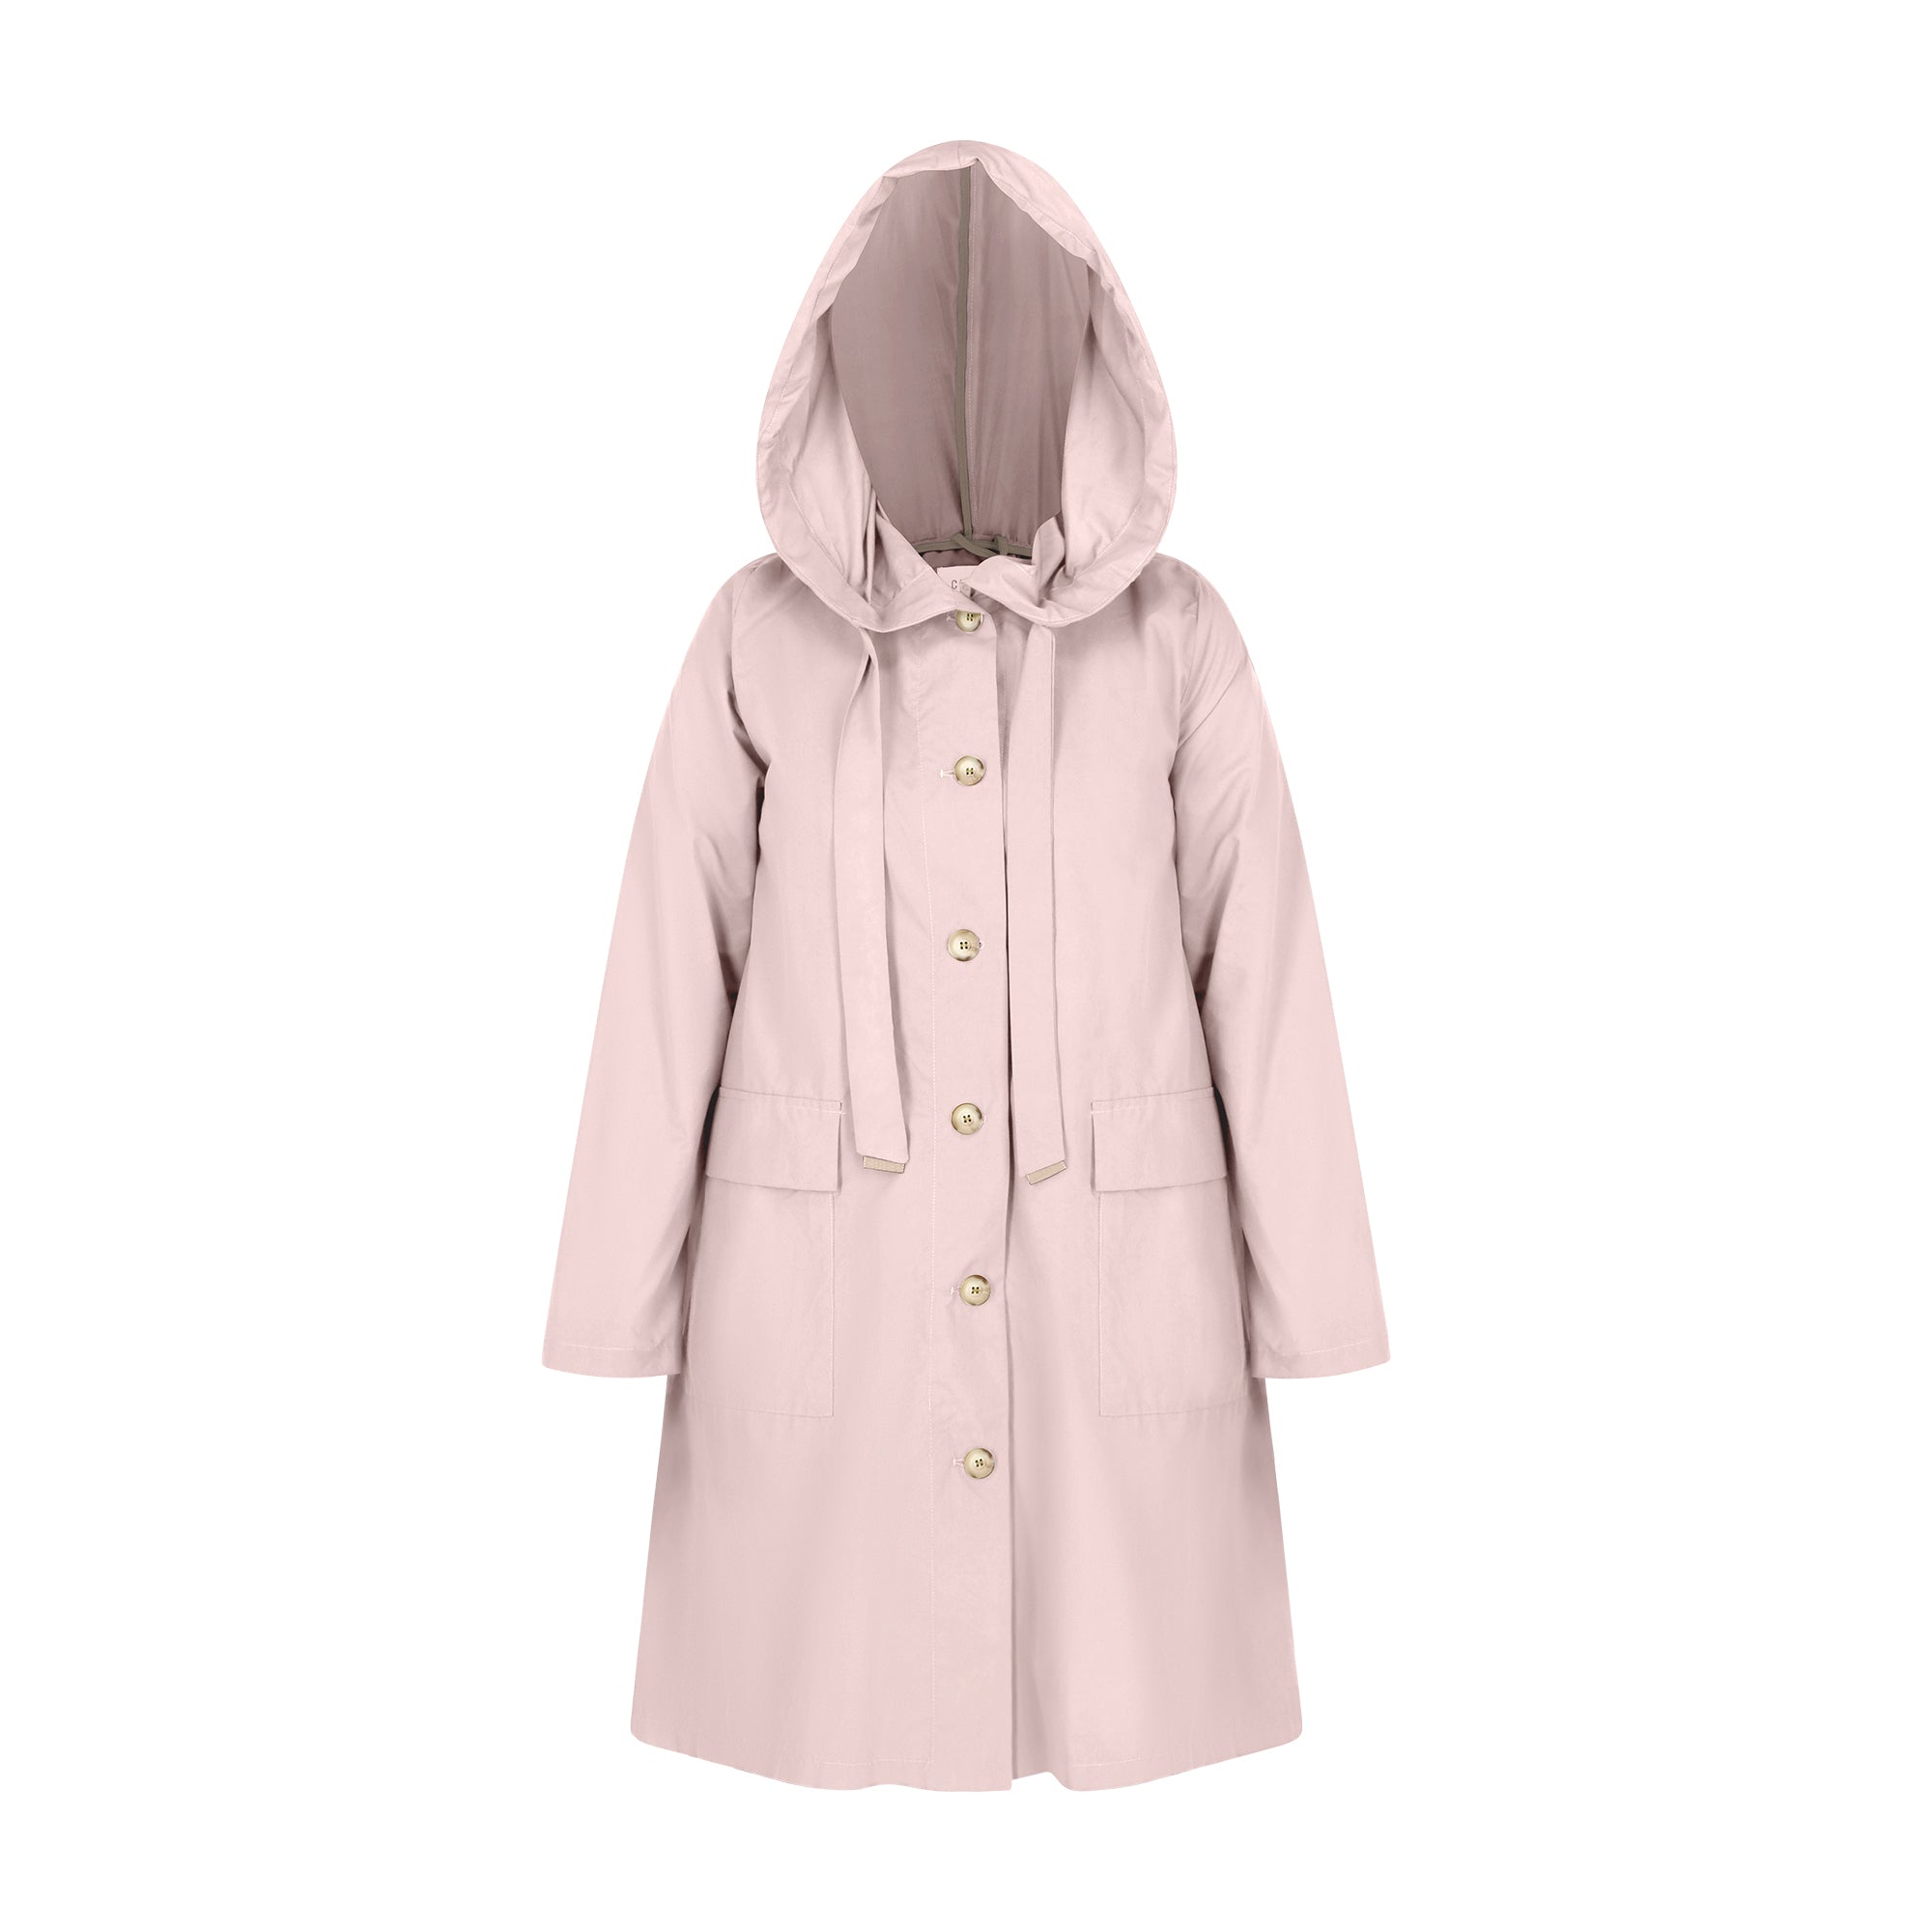 The classic raincoat - nude color - front view